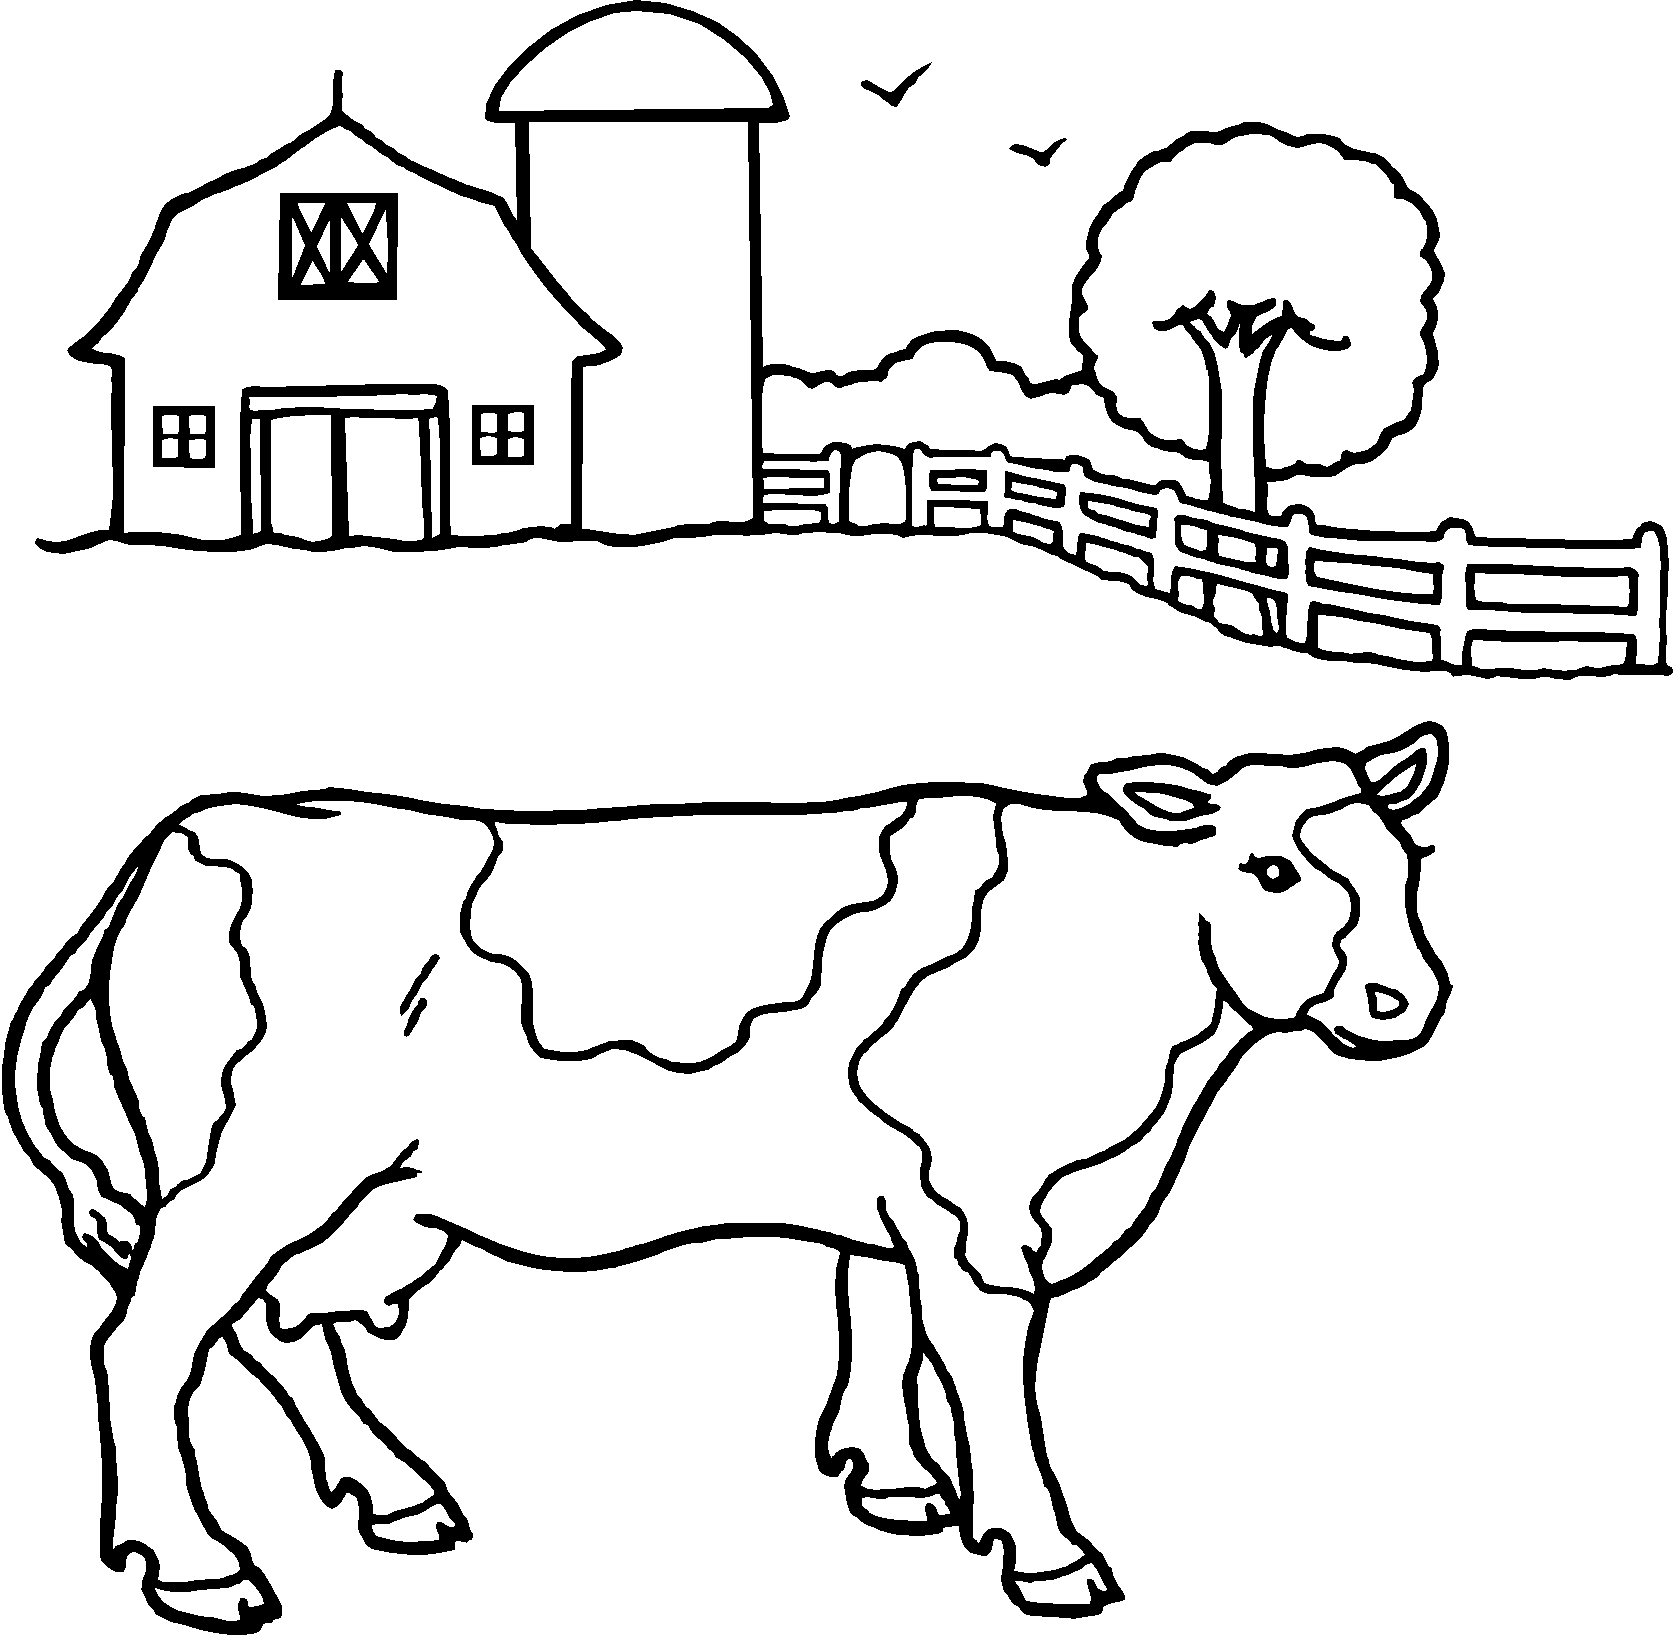 cow-coloring-page-0032-q1